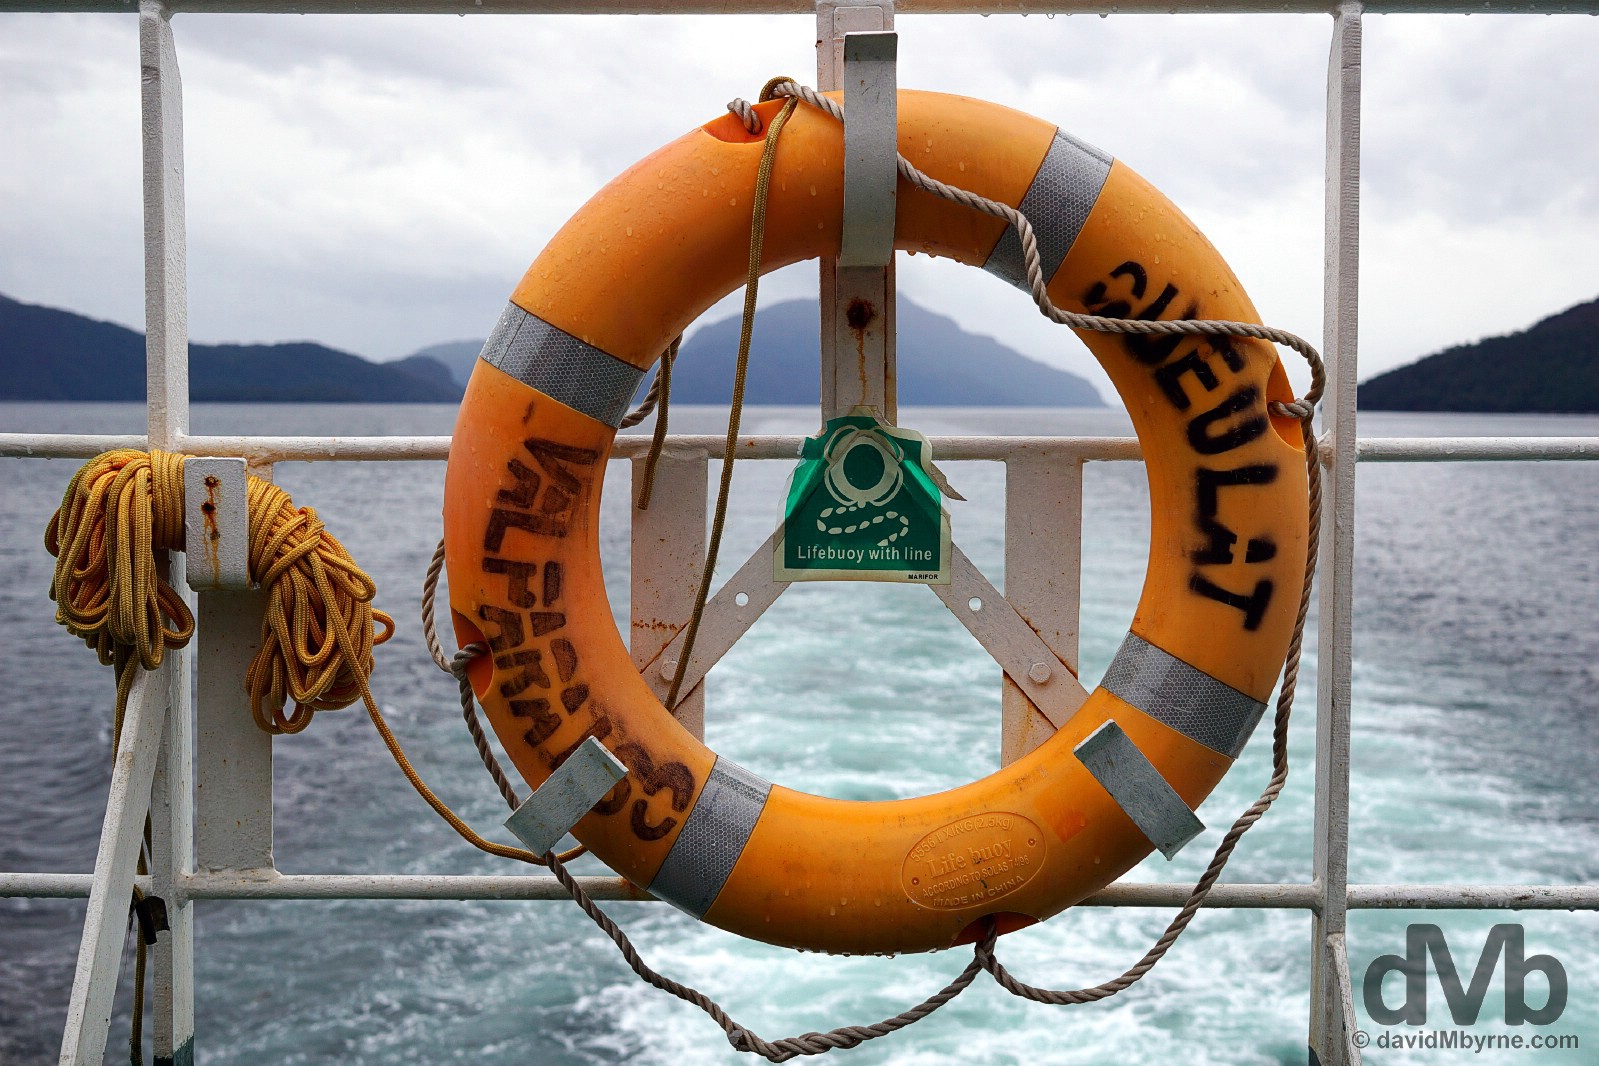 A life ring of the Valparaiso registered Queulat (slowly) plying the Canal Moraleda en route from Quellon, Chiloe, to Puerto Chacabuco, Chile. October 25, 2015.  